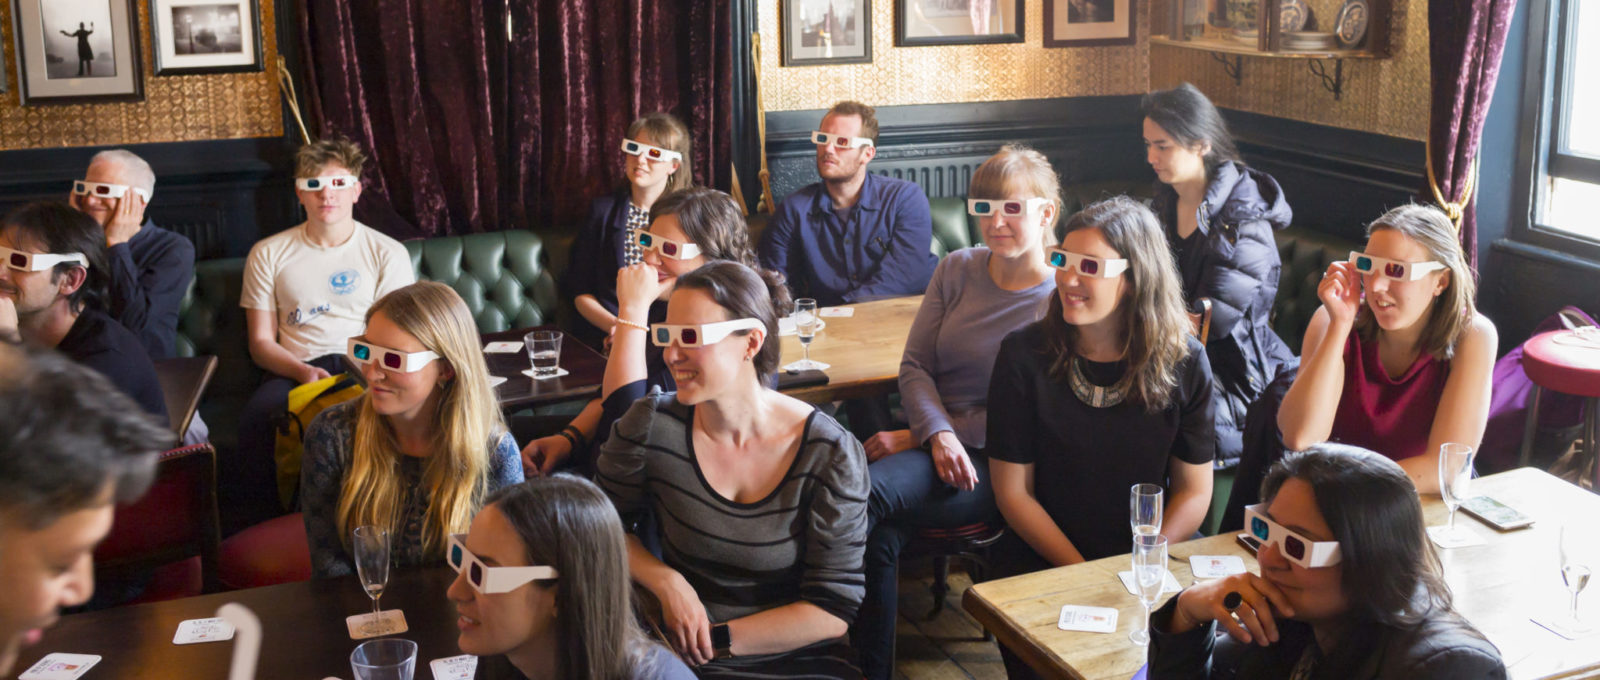 Science Communication: Crowd with 3D glasses in bar during Pint of Science event